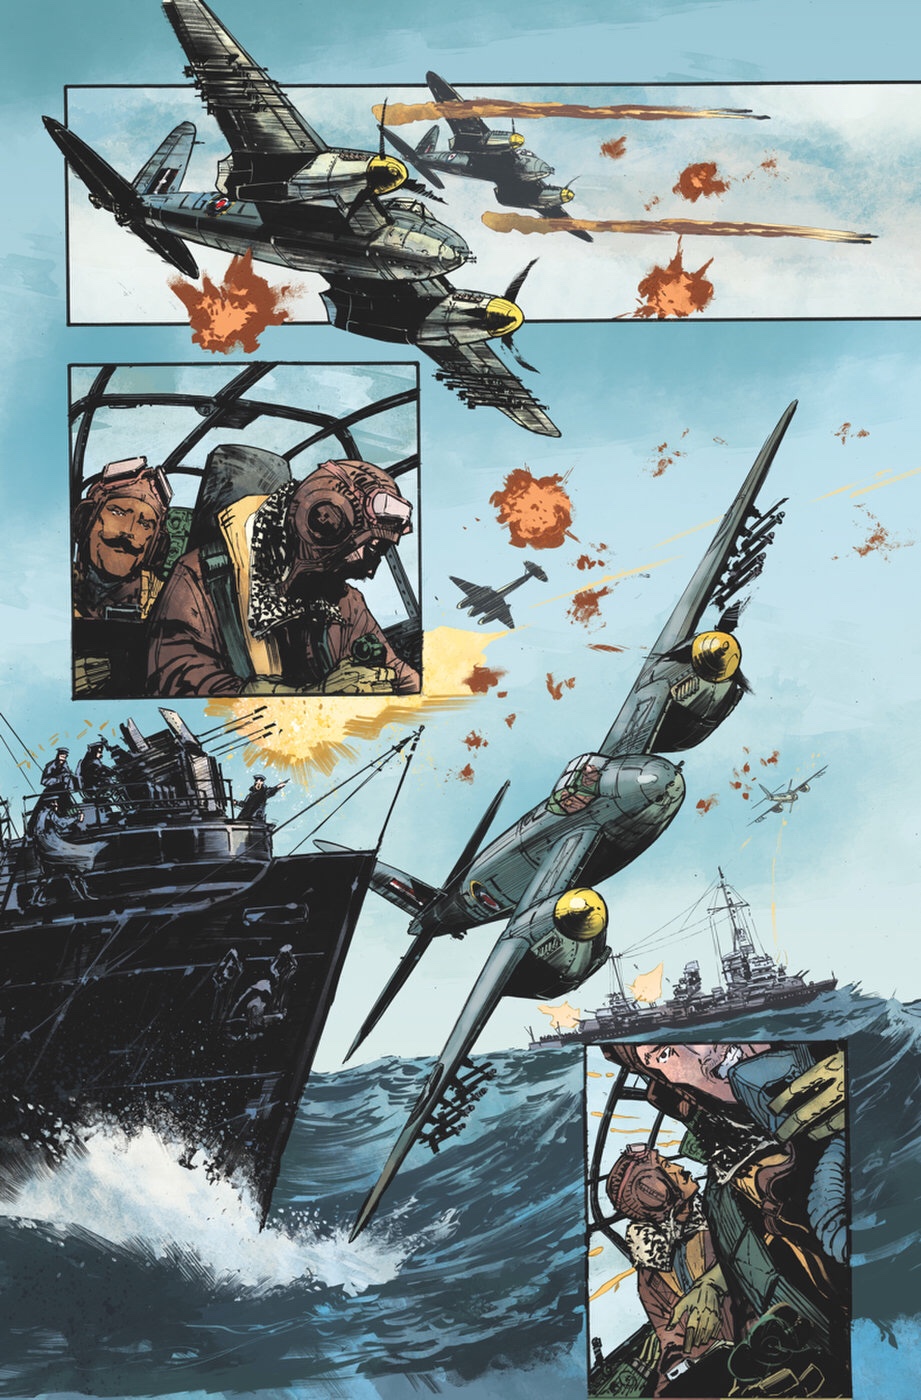 Out of the Blue by Garth Ennis and Keith Burns